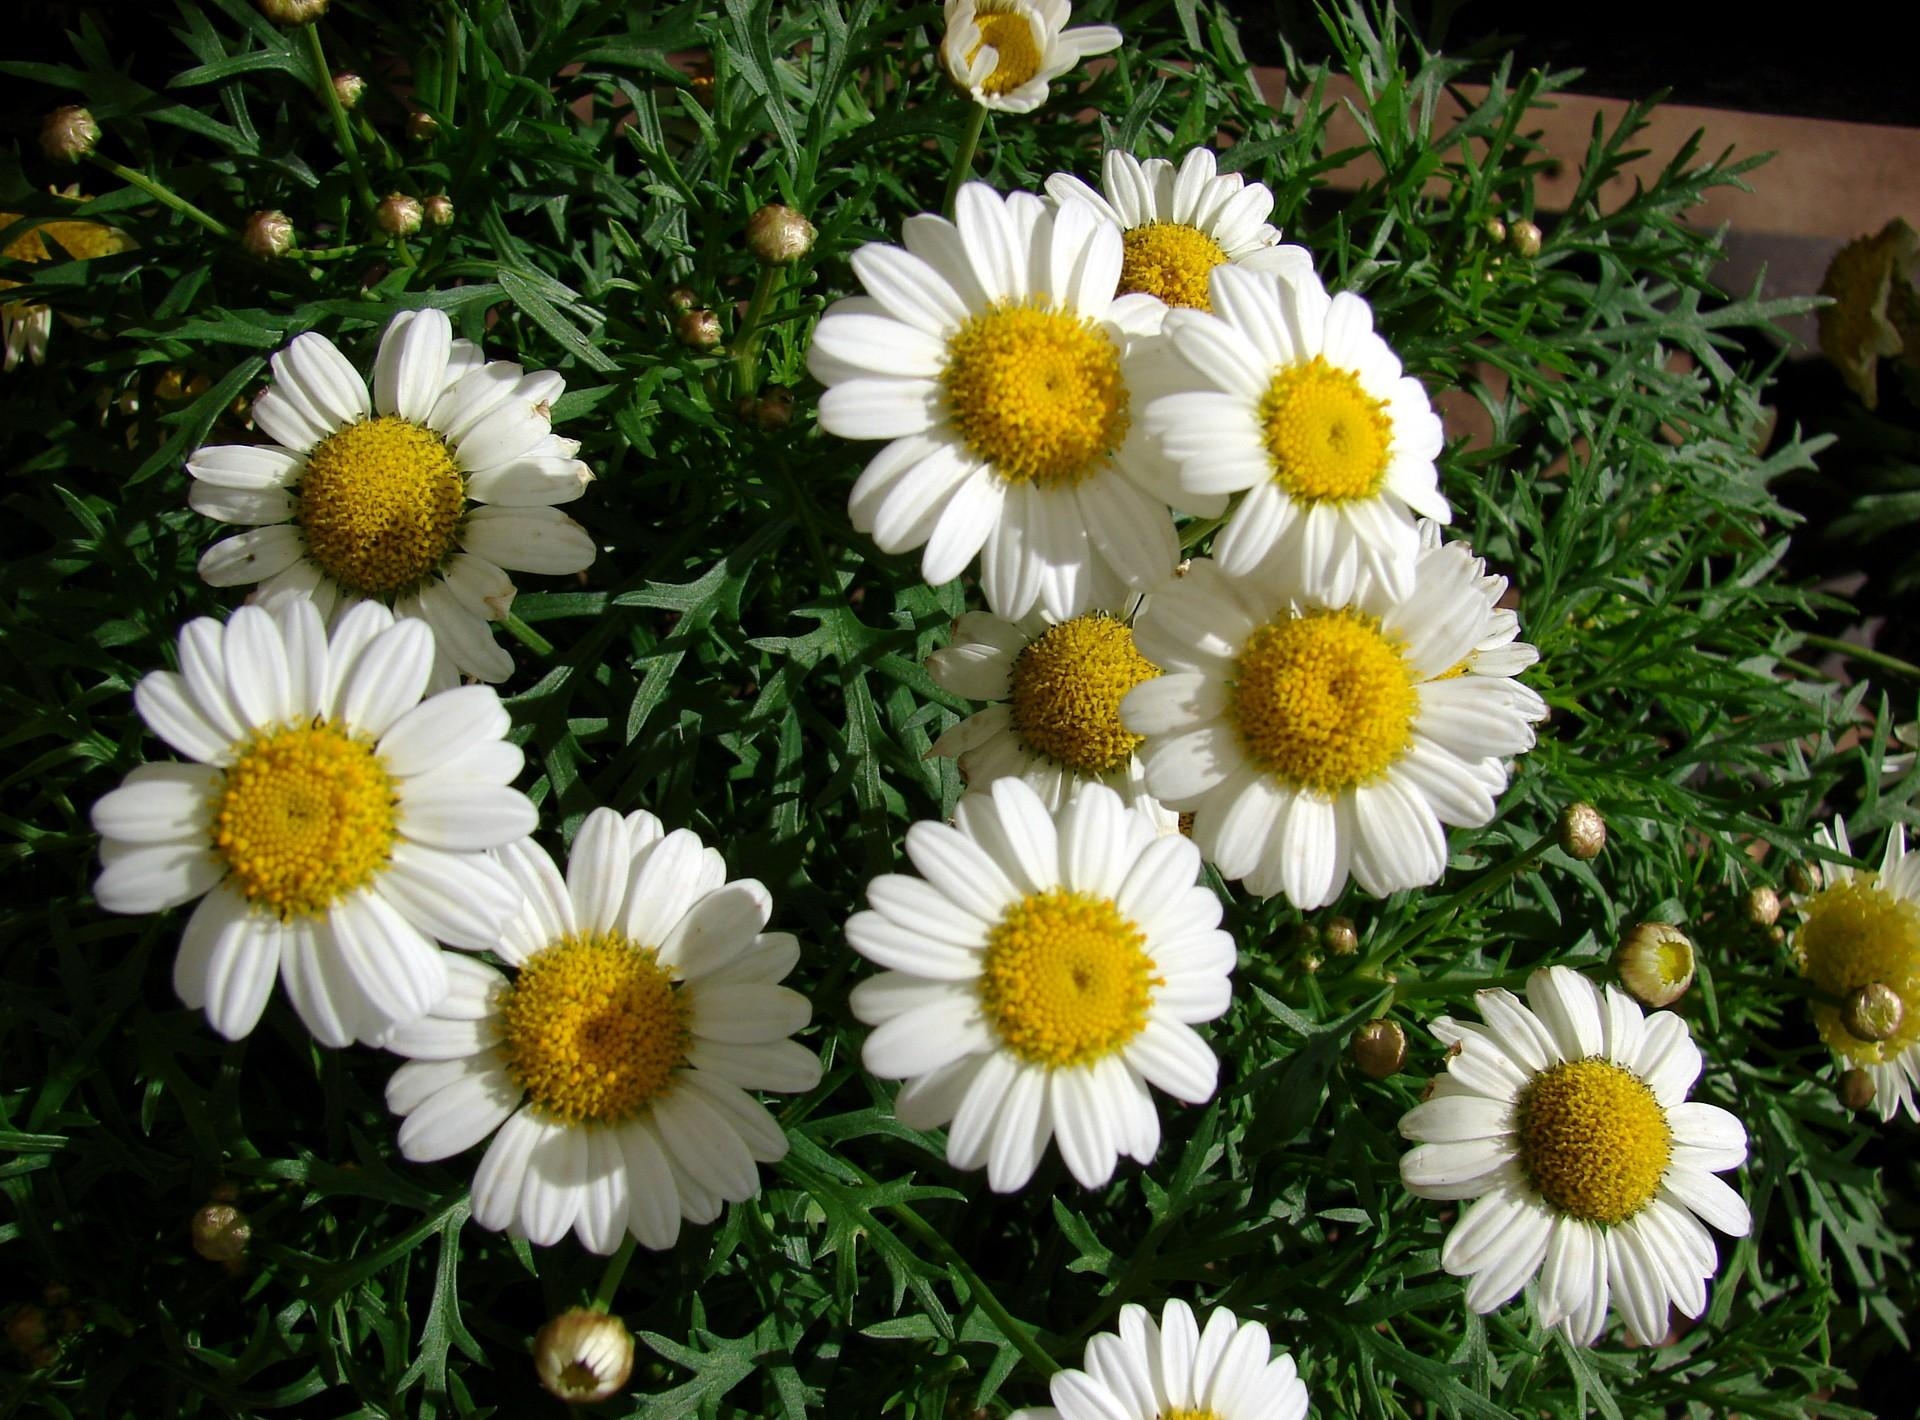 flower bed, flowers, camomile, white, greens, flowerbed, snow white